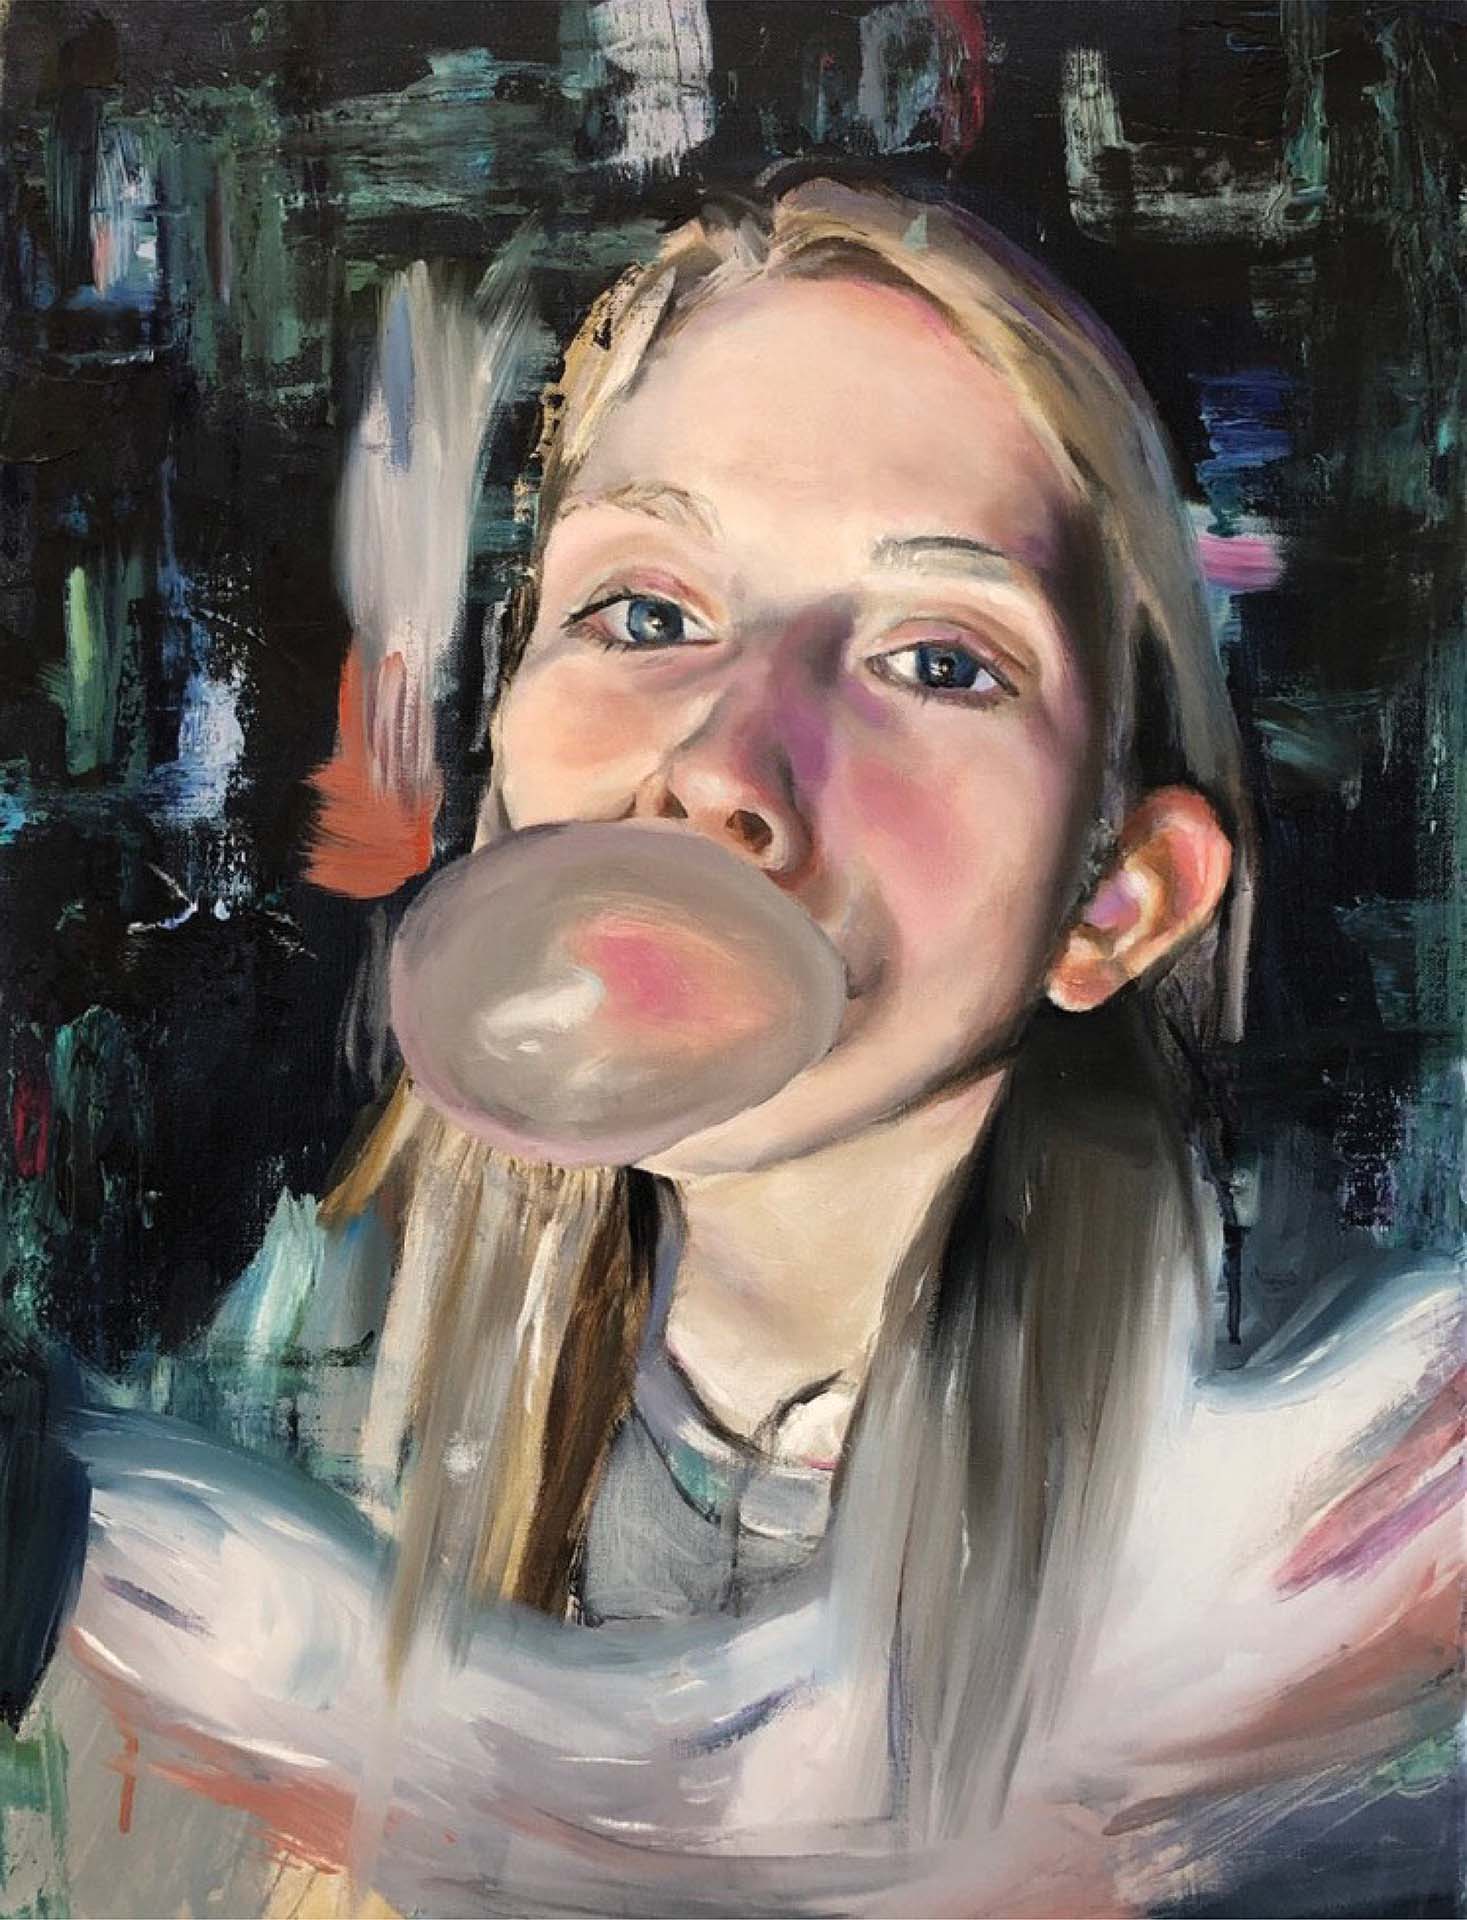 painting of a girl blowing bubble gum in a whispy streaks